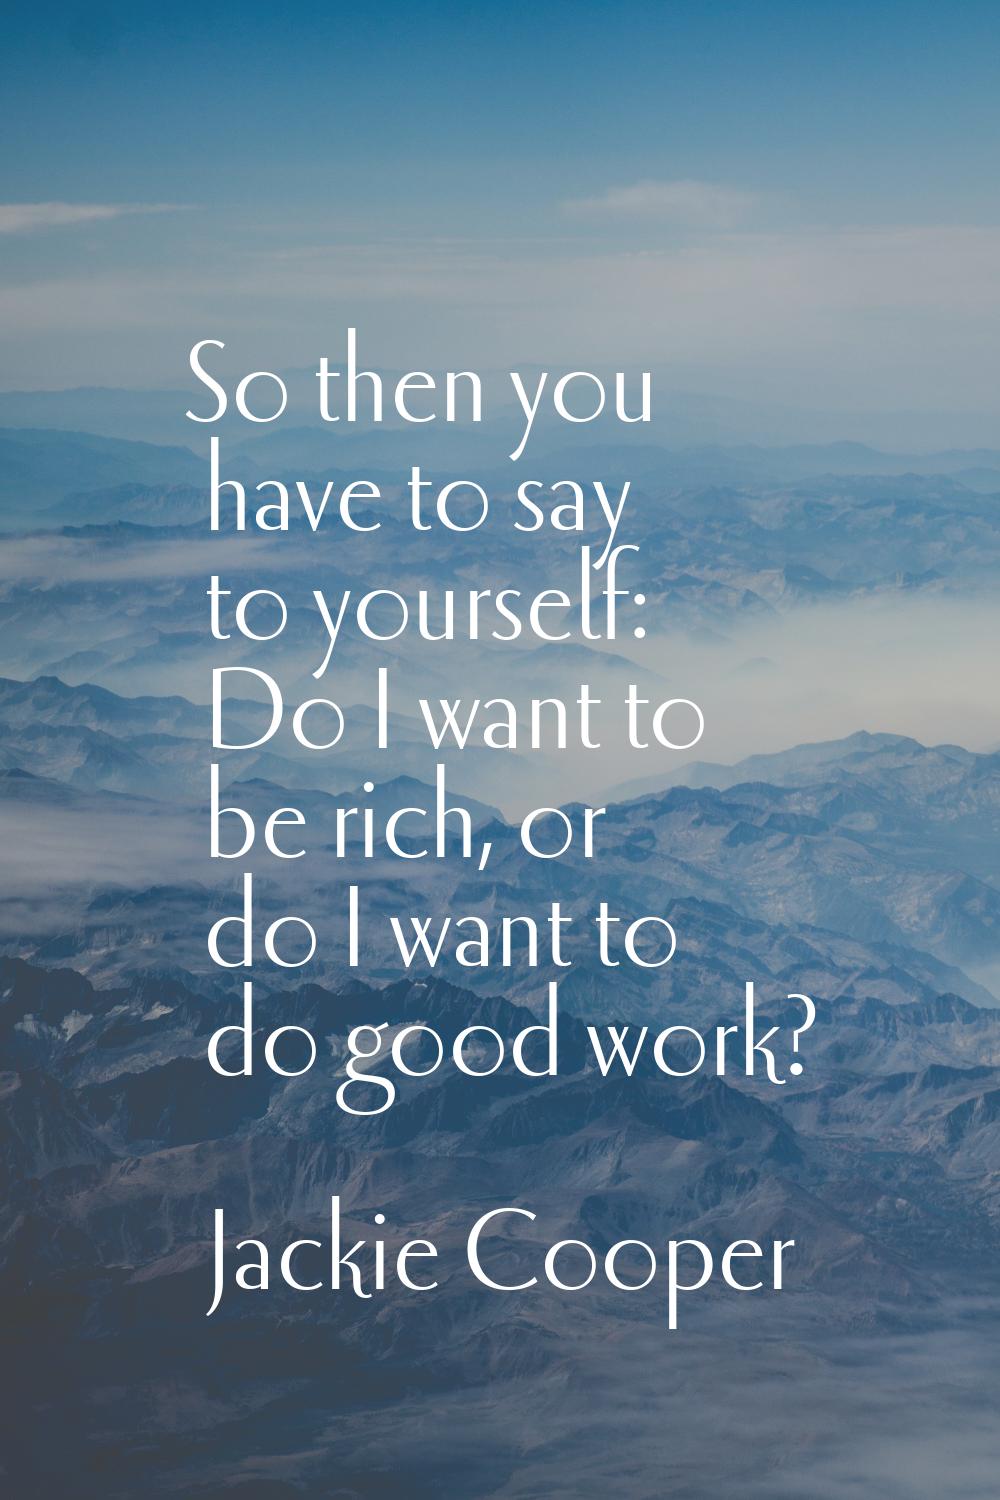 So then you have to say to yourself: Do I want to be rich, or do I want to do good work?